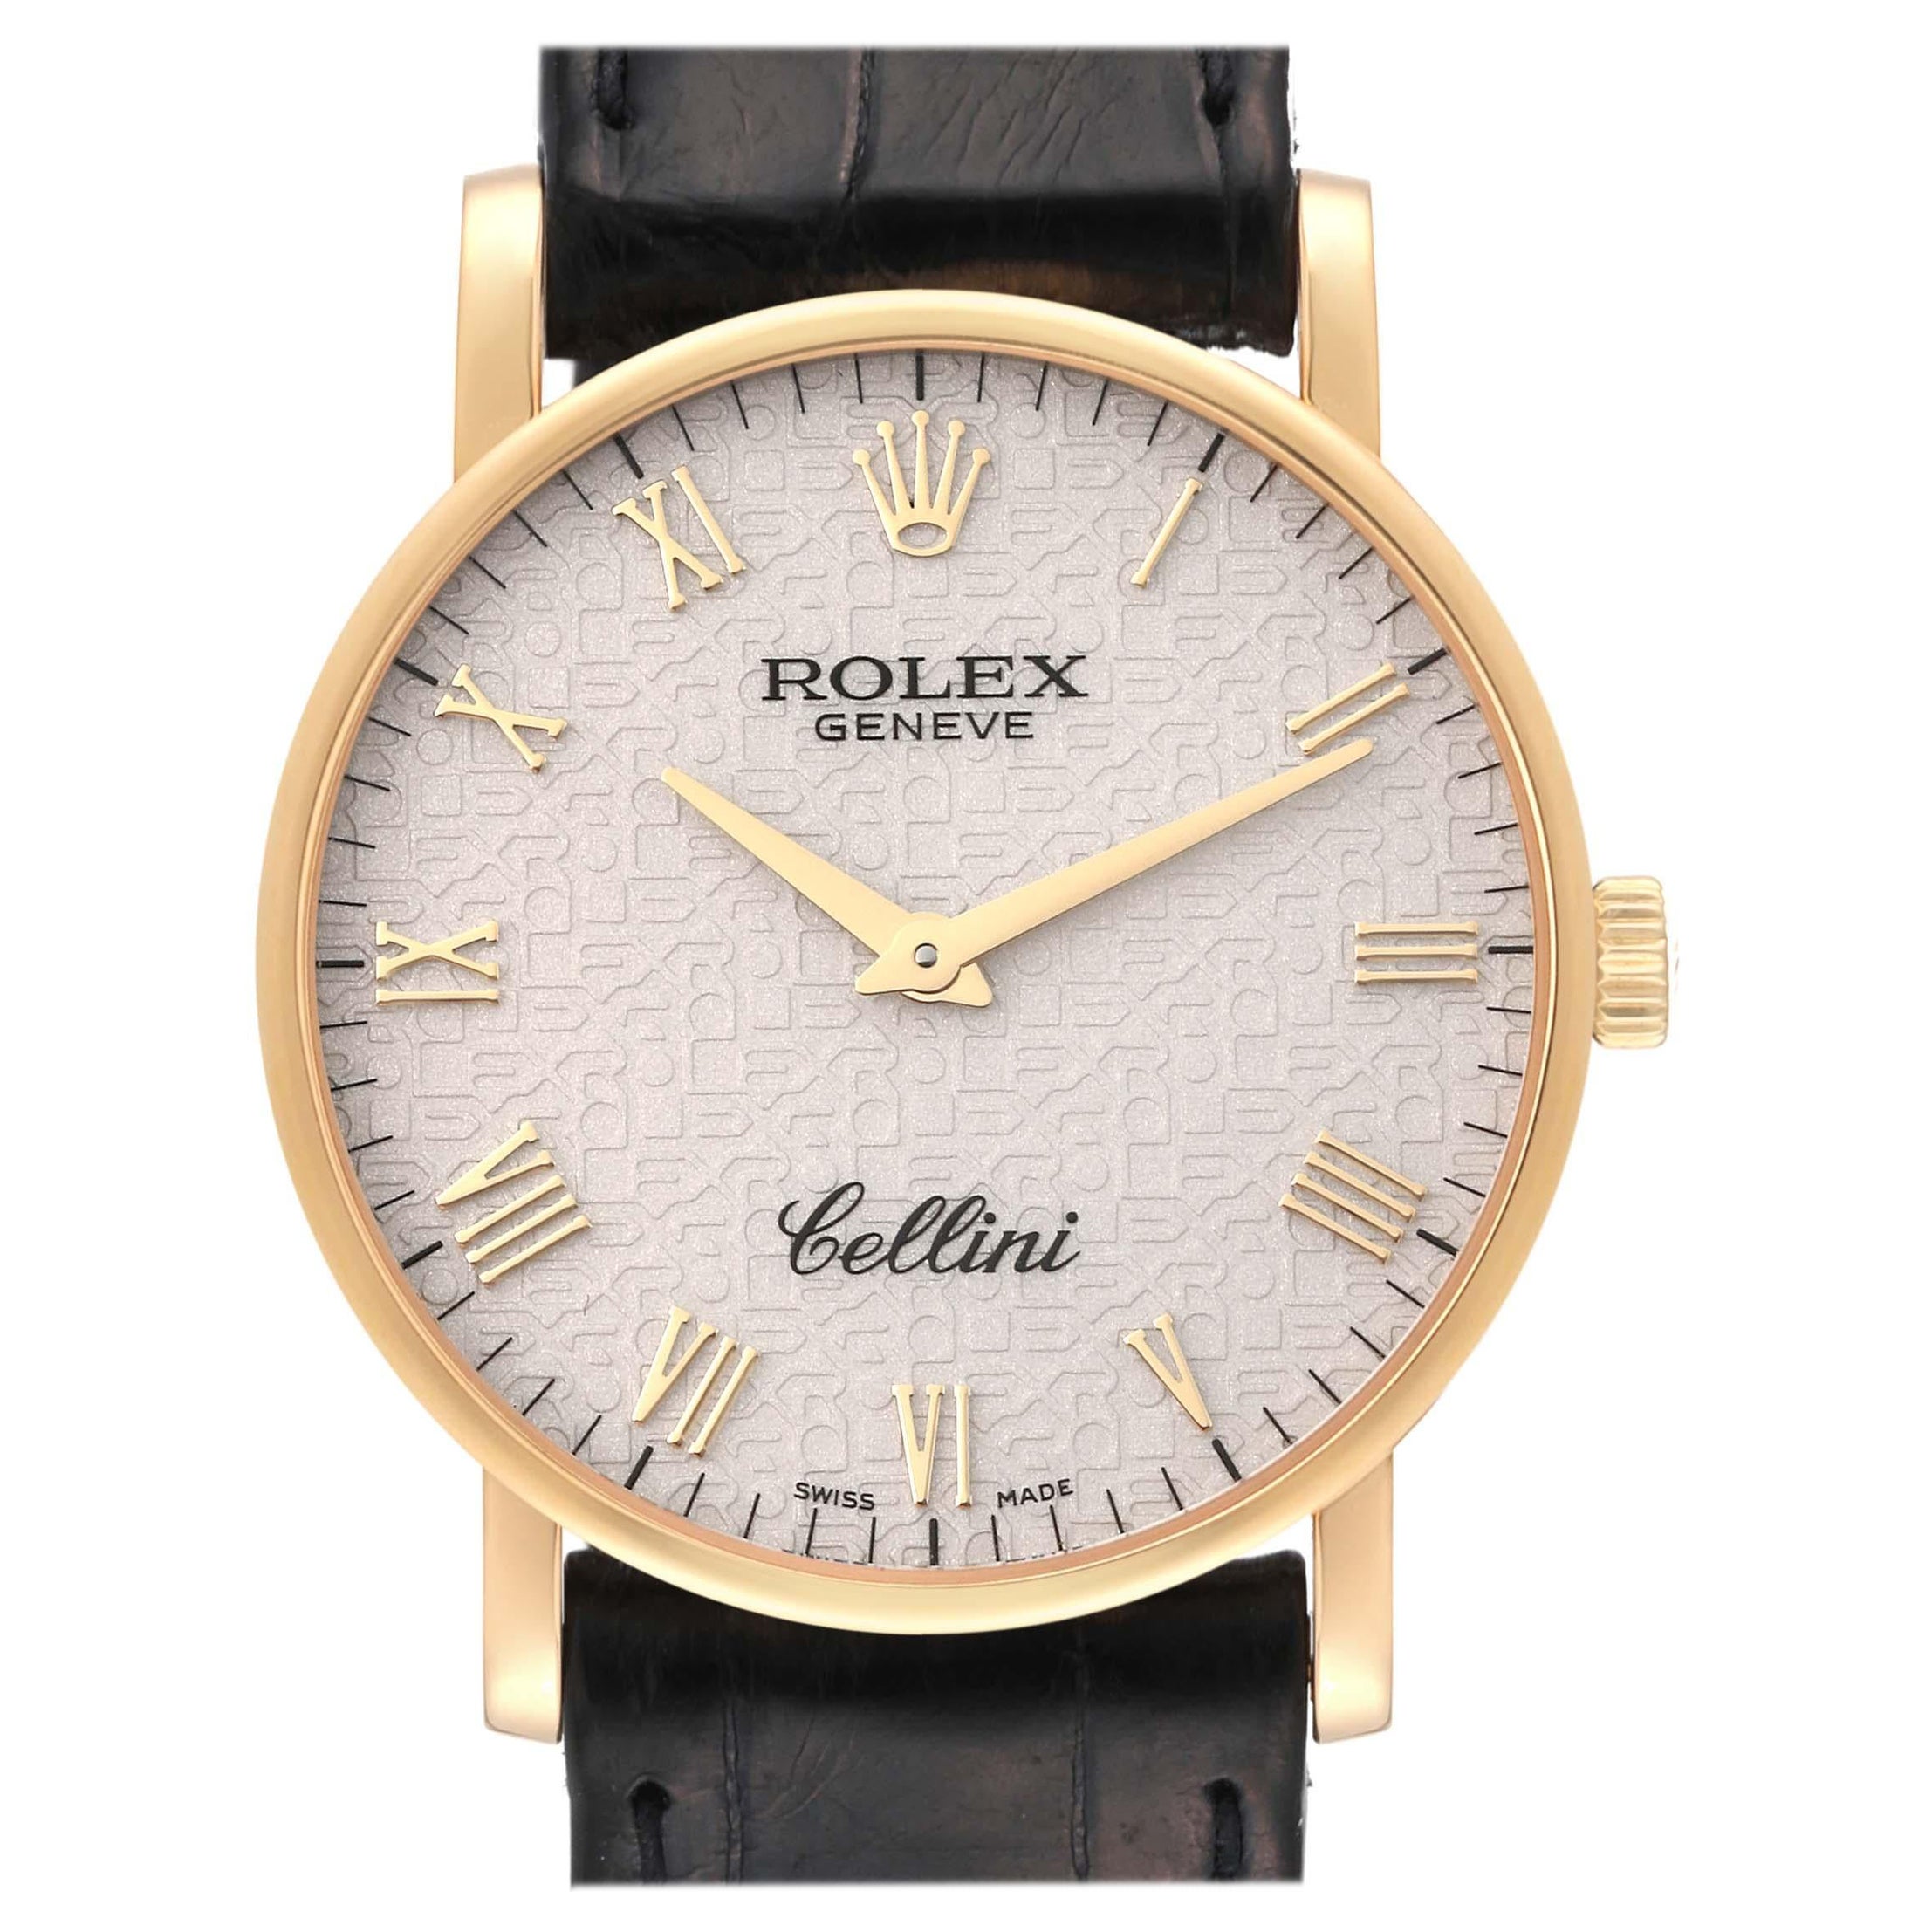 Rolex Cellini Classic Yellow Gold Ivory Anniversary Dial Mens Watch 5115 Card